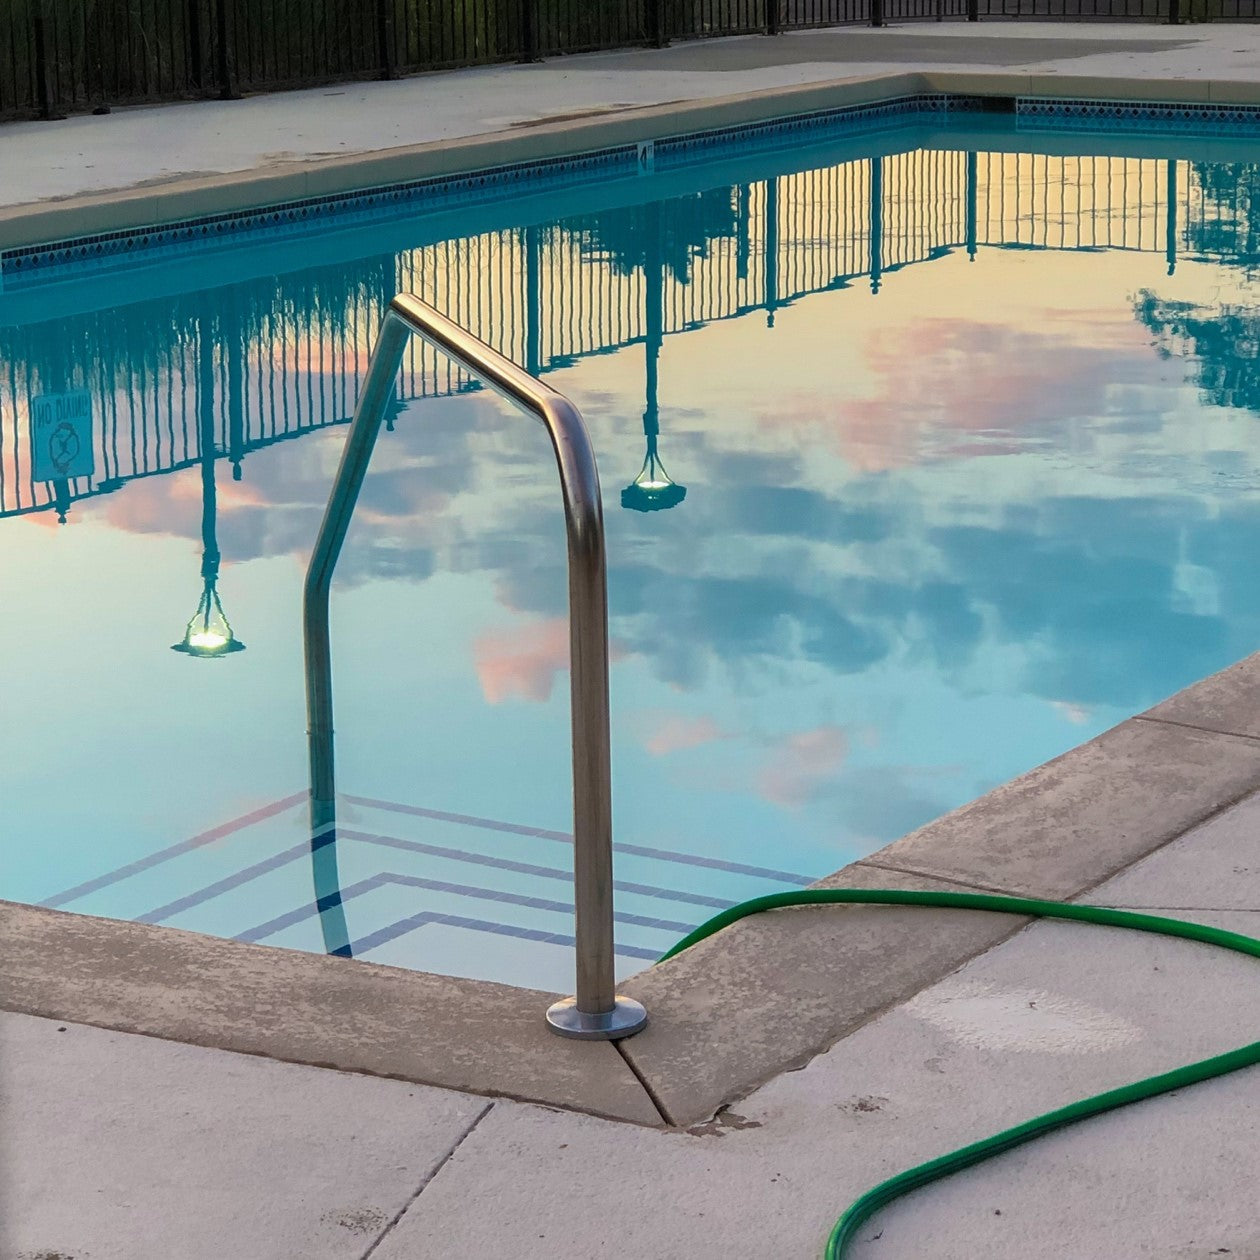 Cleaning Tips to Extend Your Pool’s Life